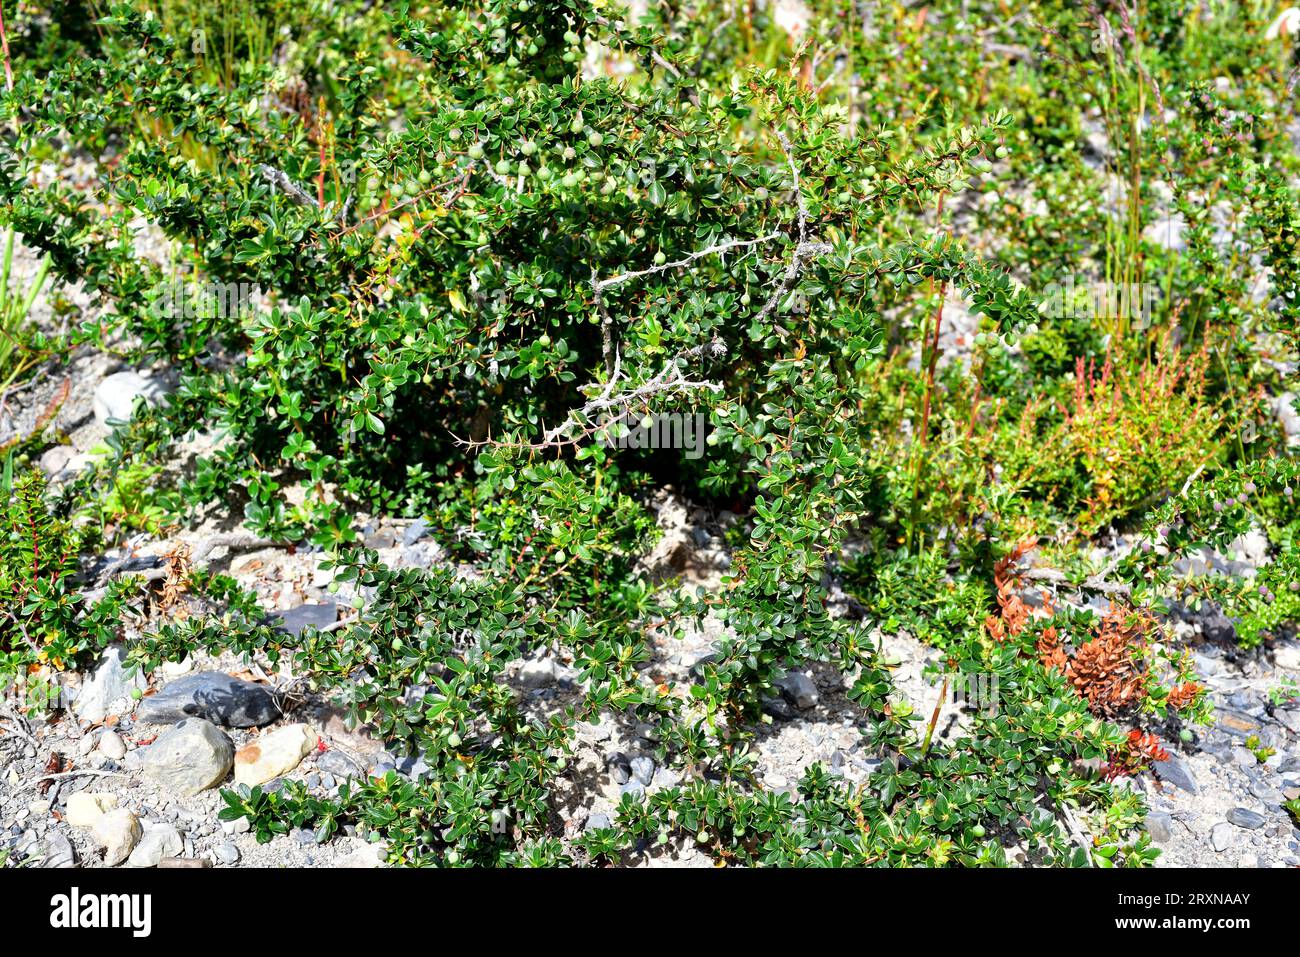 Calafate (Berberis buxifolia or Berberis microphylla) is an evergreen shrub endemic to Patagonia. This photo was taken in Torres del Paine National Pa Stock Photo